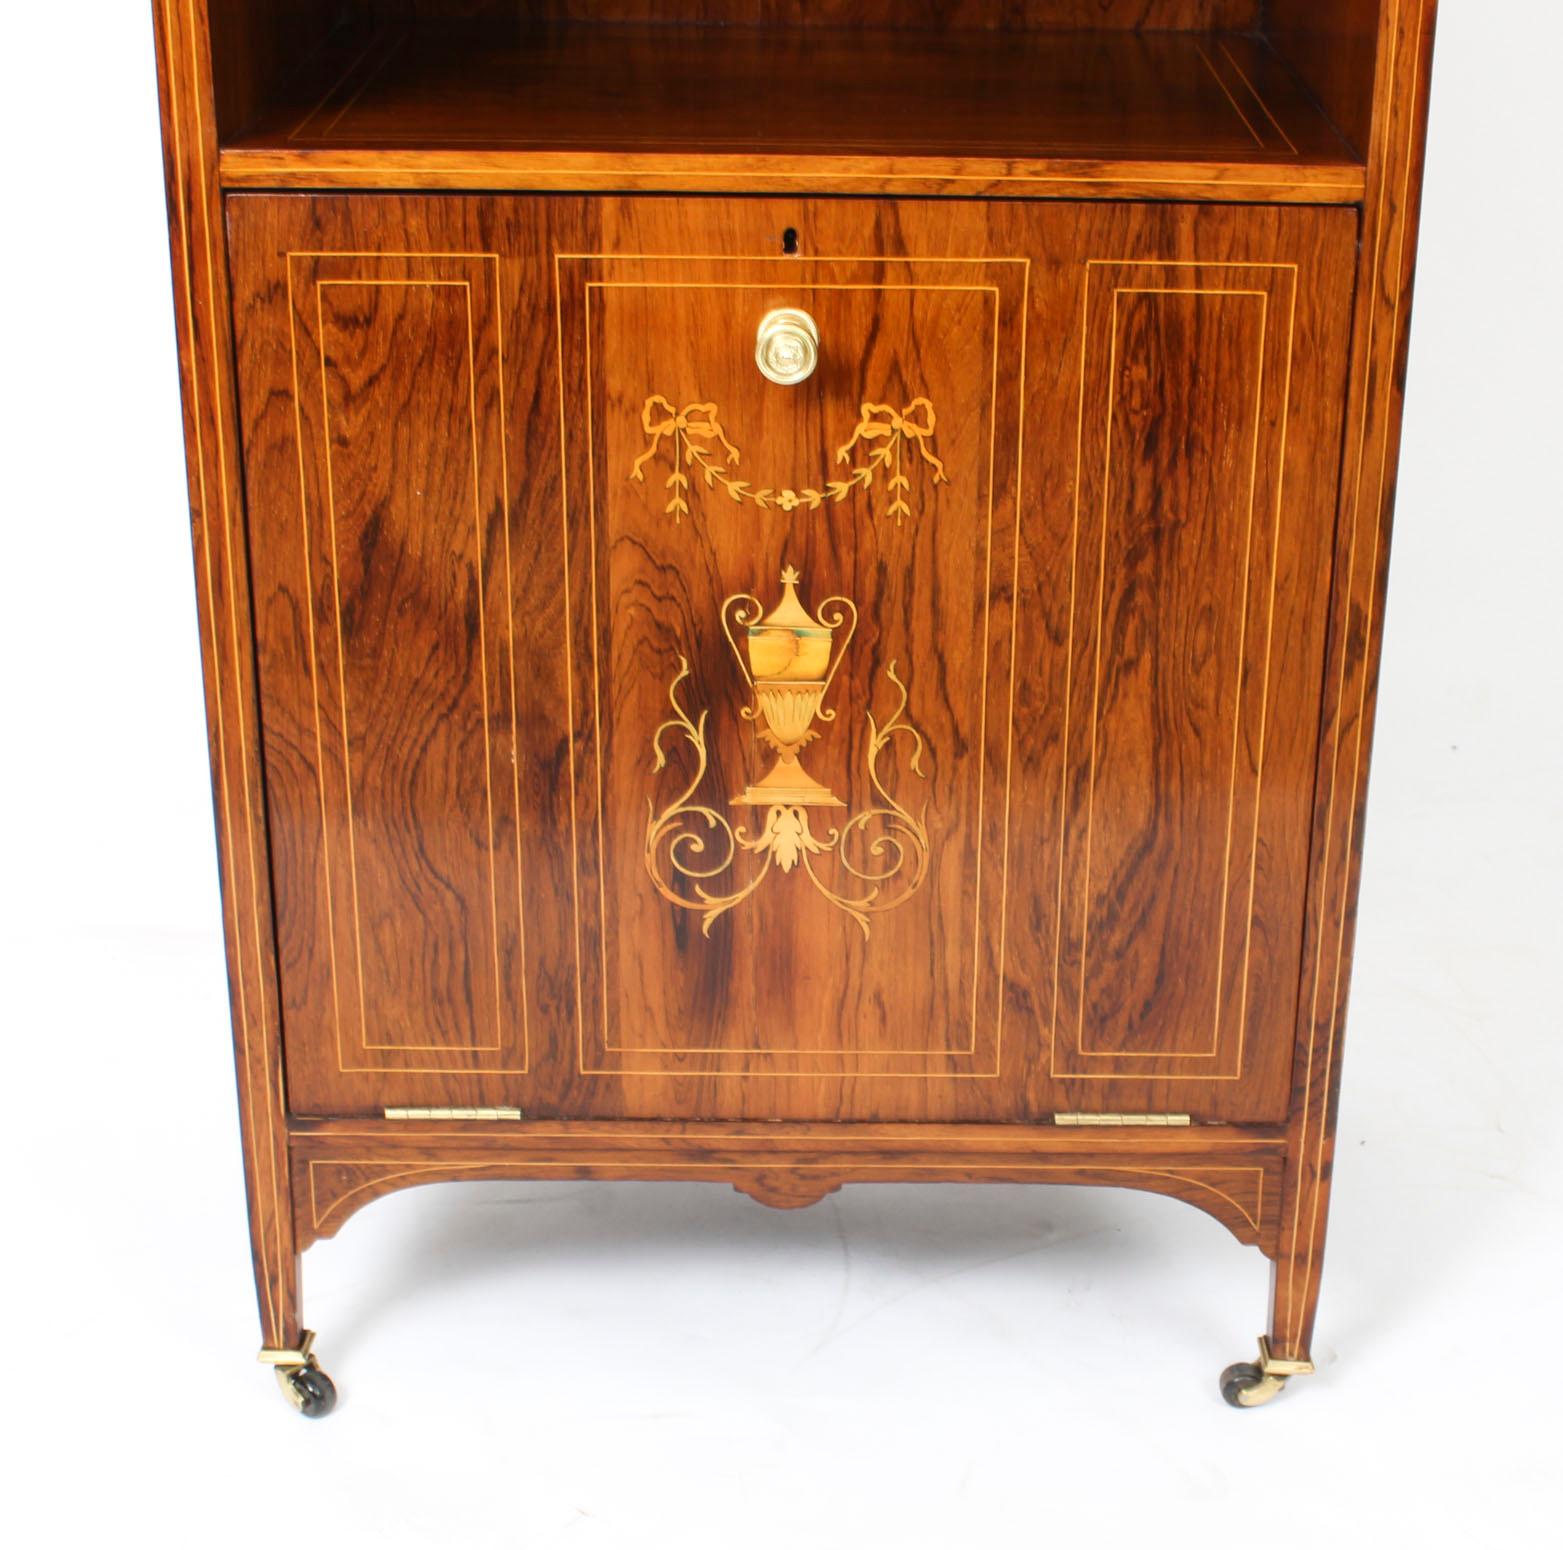 Antique Edwardian Gonçalo Alves Marquetry Inlaid Music Cabinet 19th Century For Sale 2